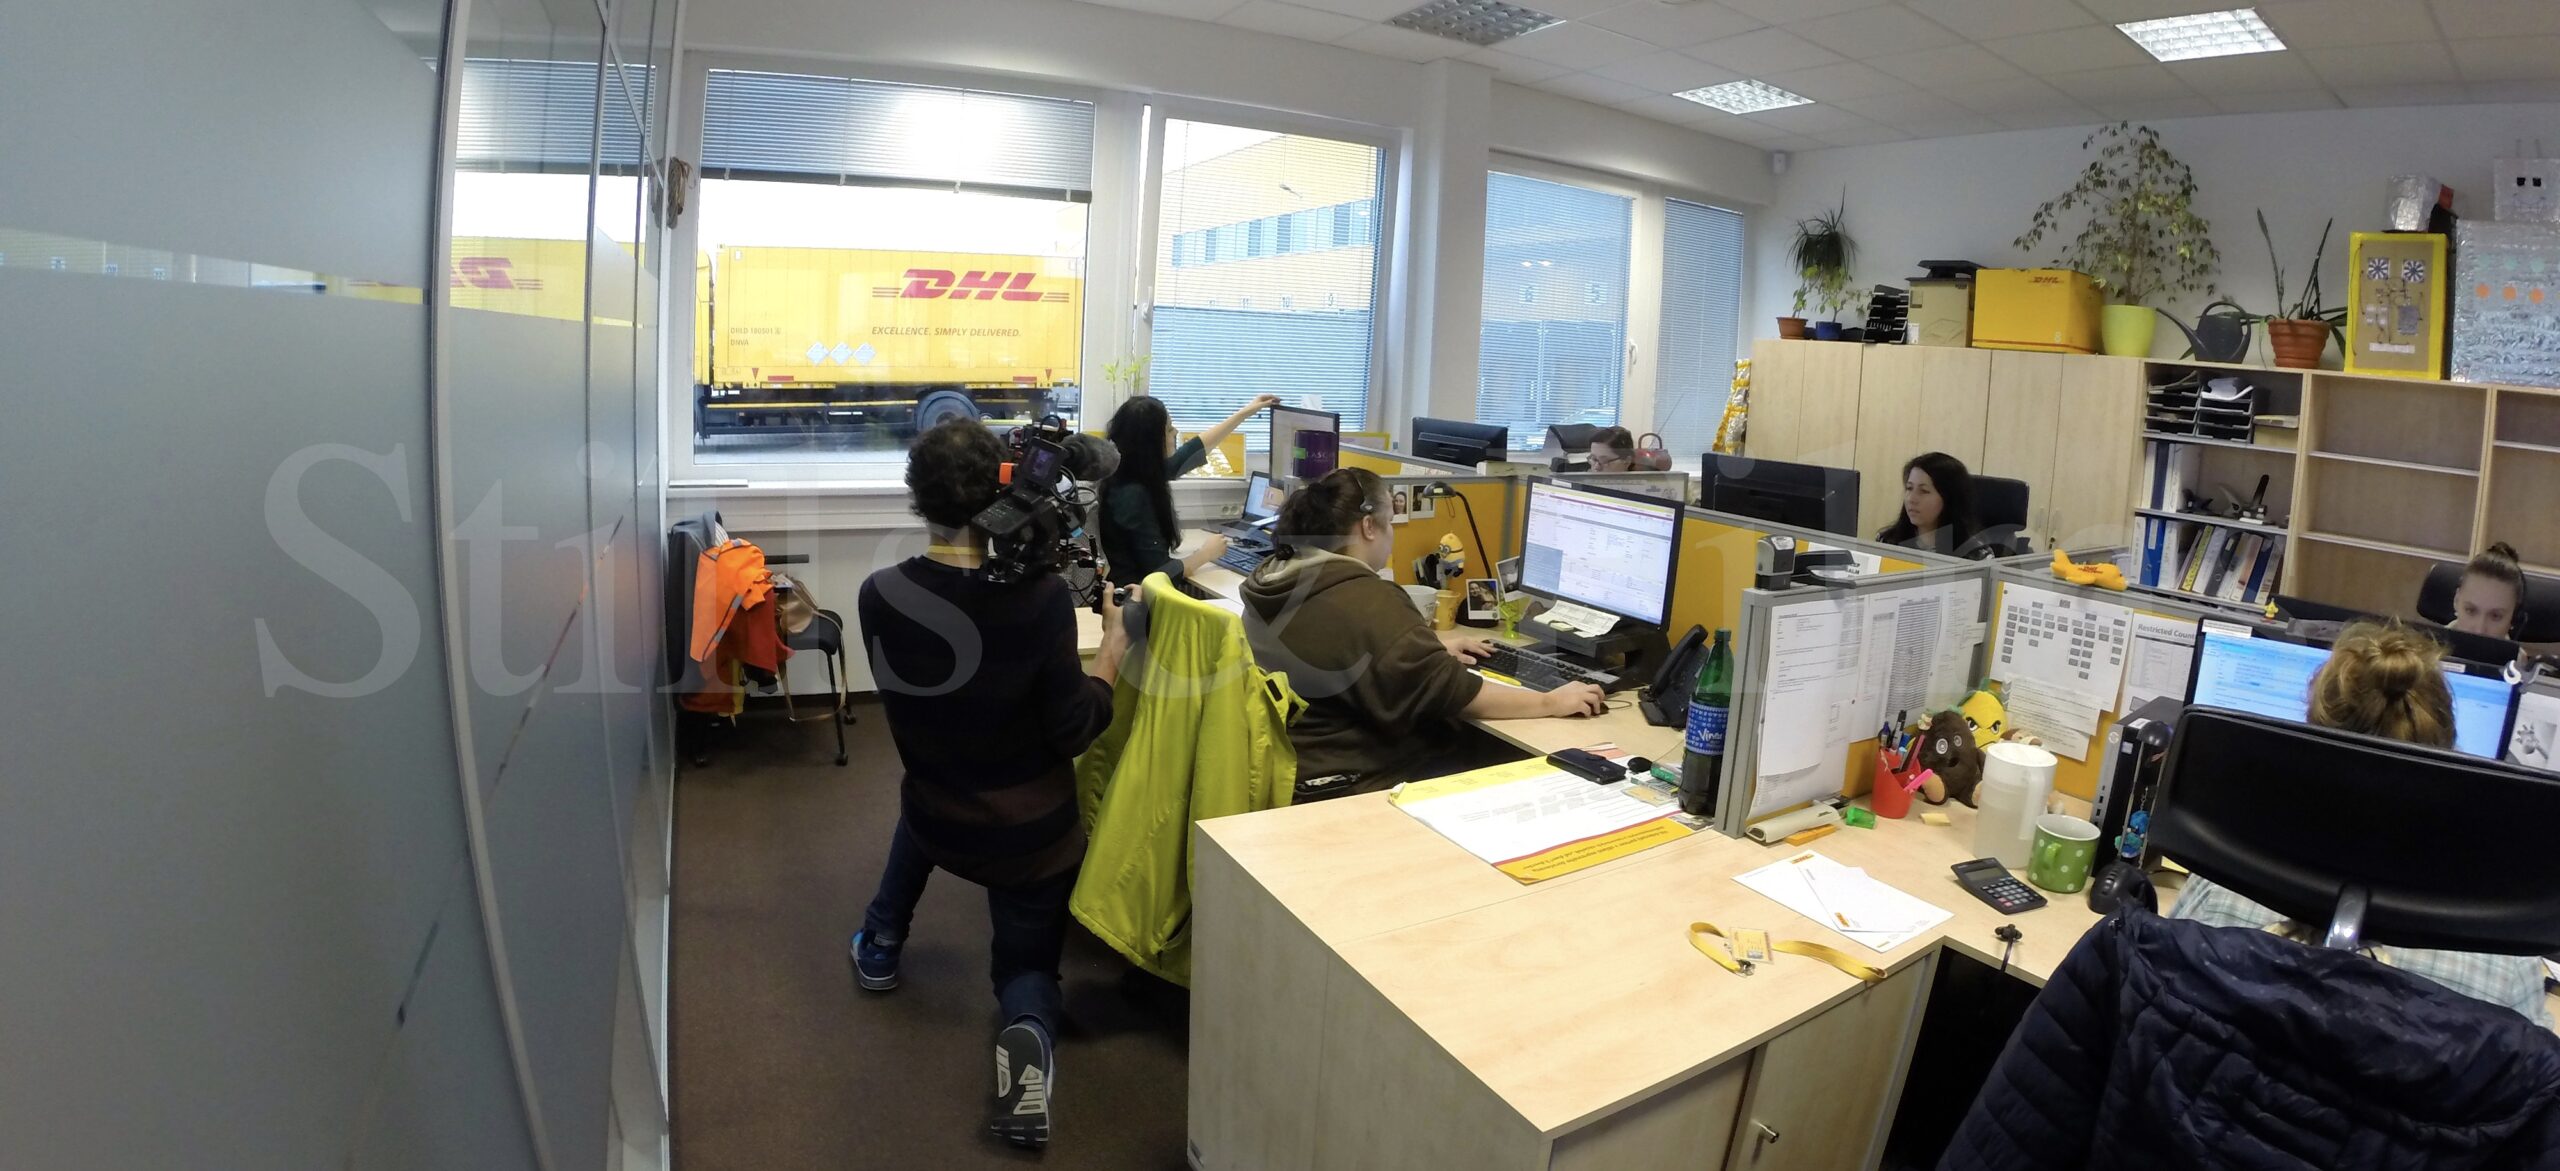 Filming at their premises in Bratislava for DHL